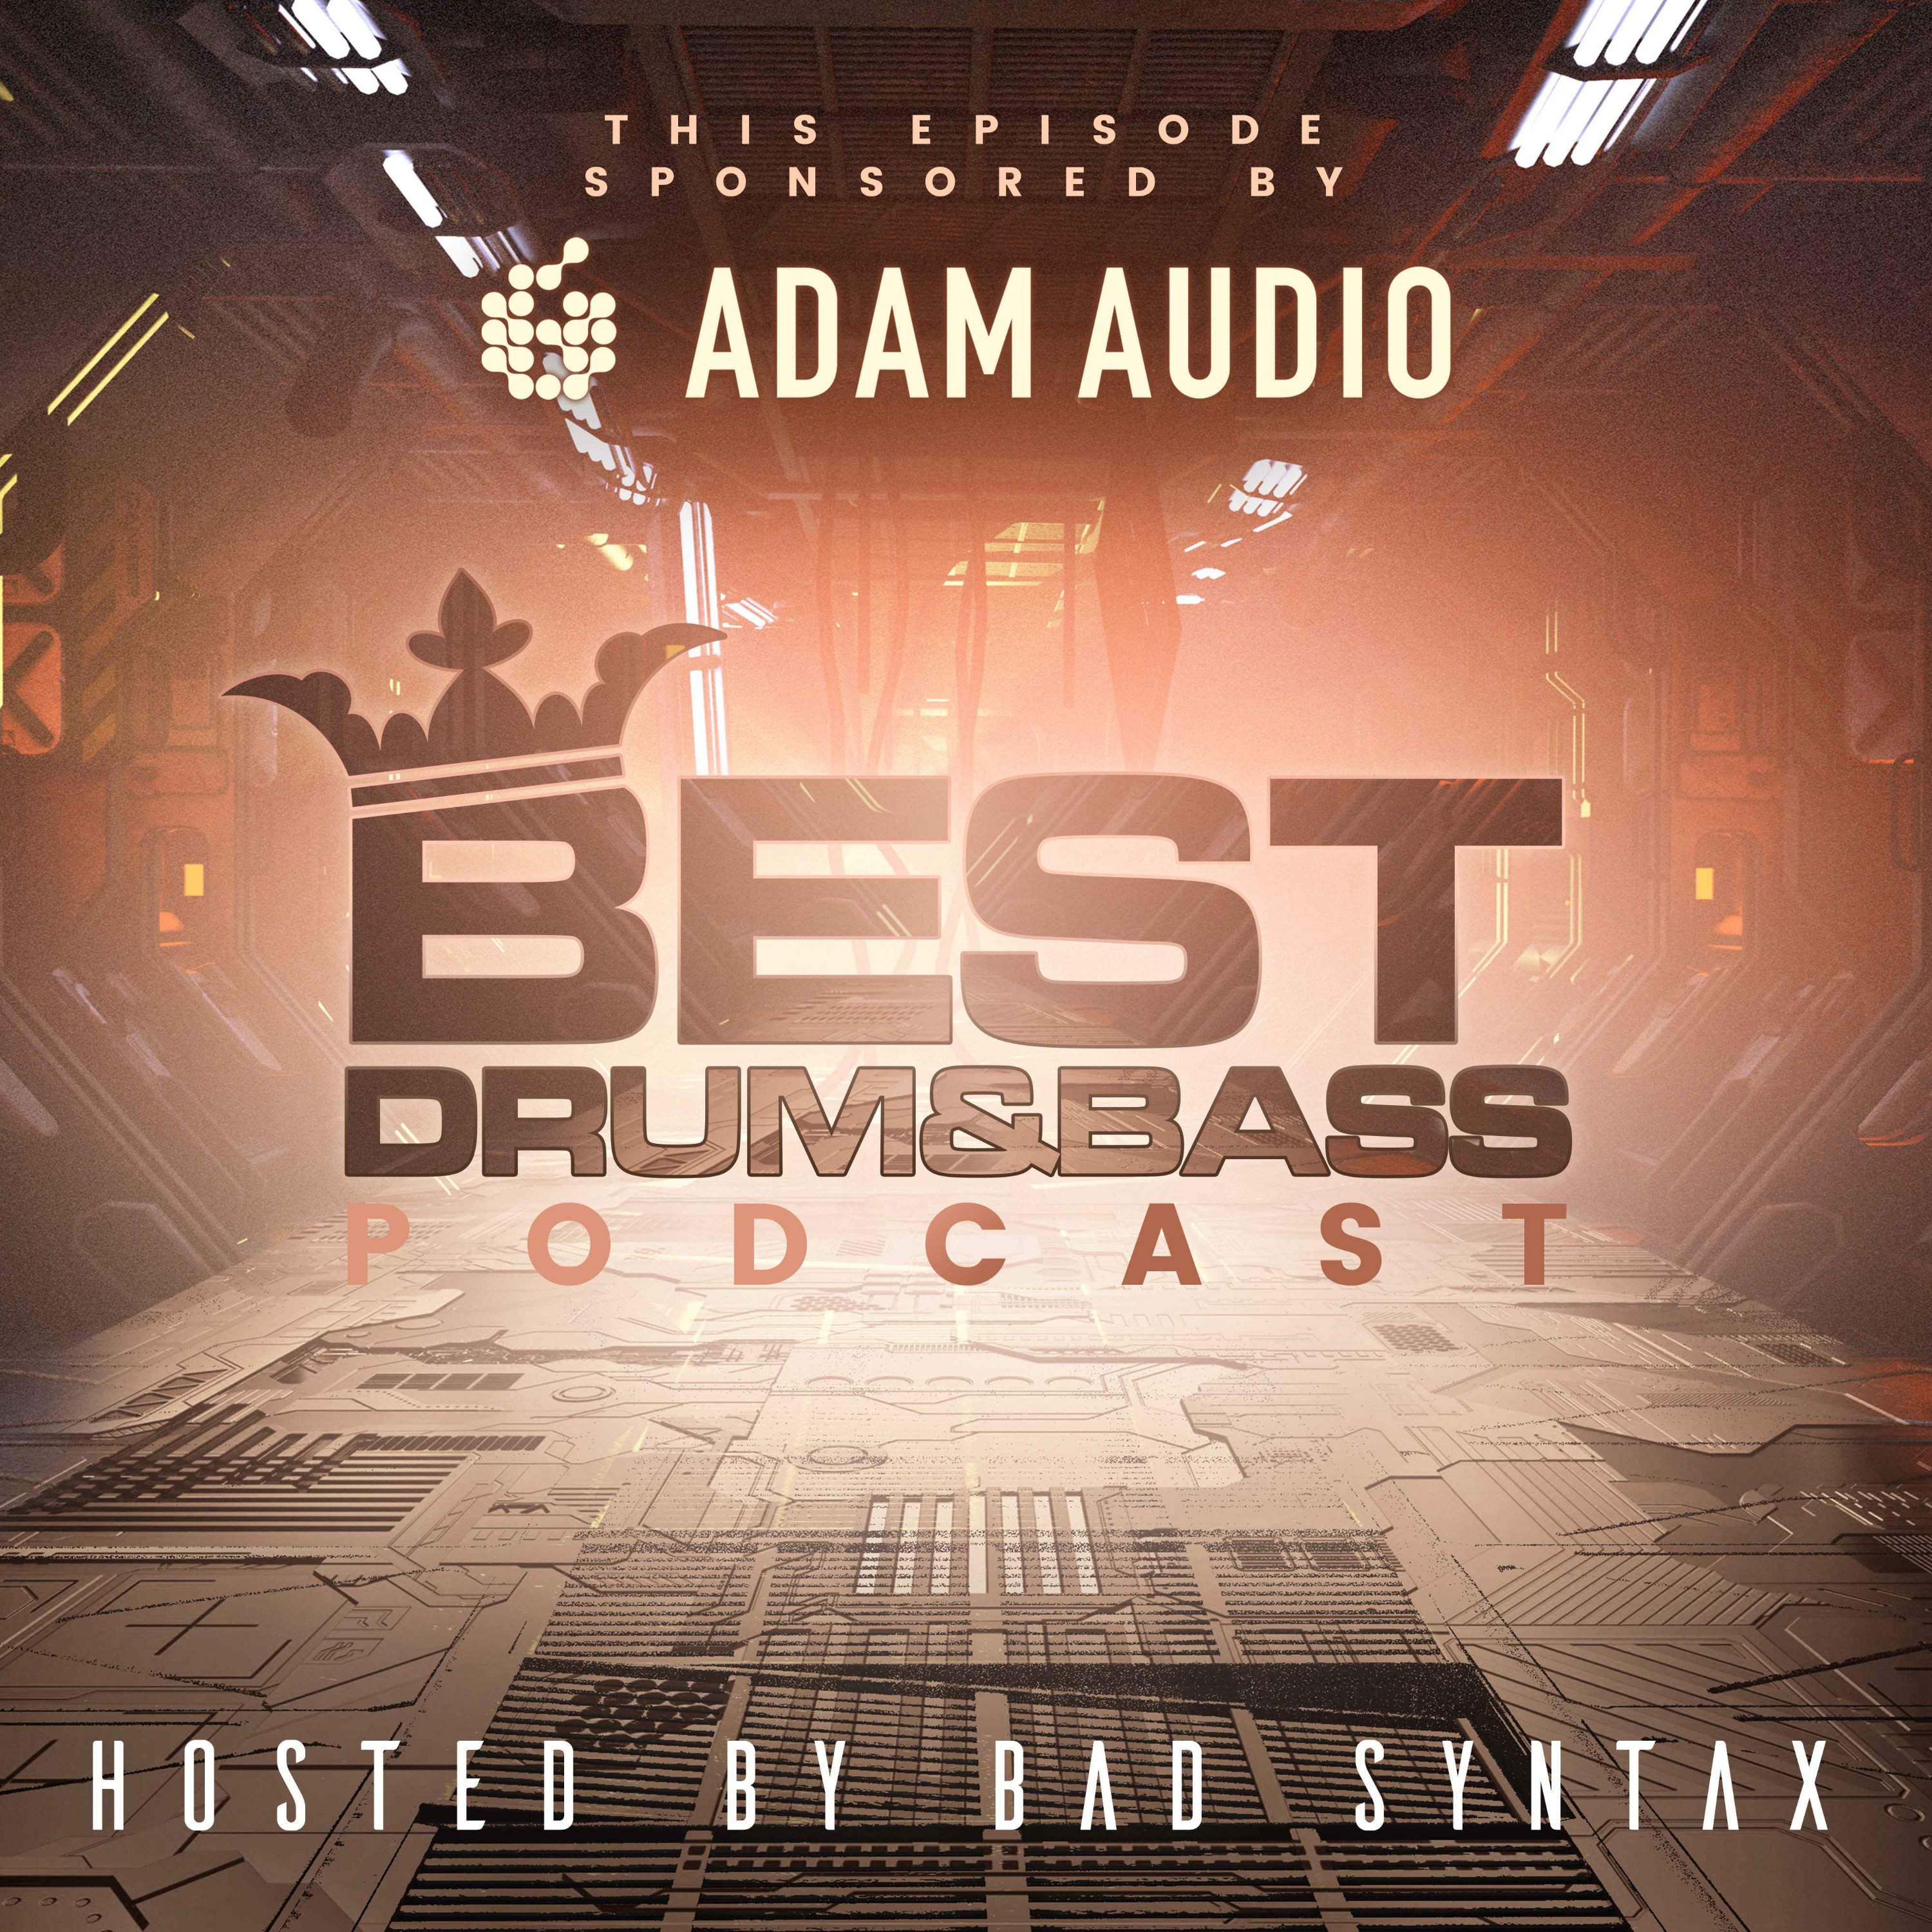 Podcast 442 - Bad Syntax & Bolter [Sponsored by Adam Audio] Artwork